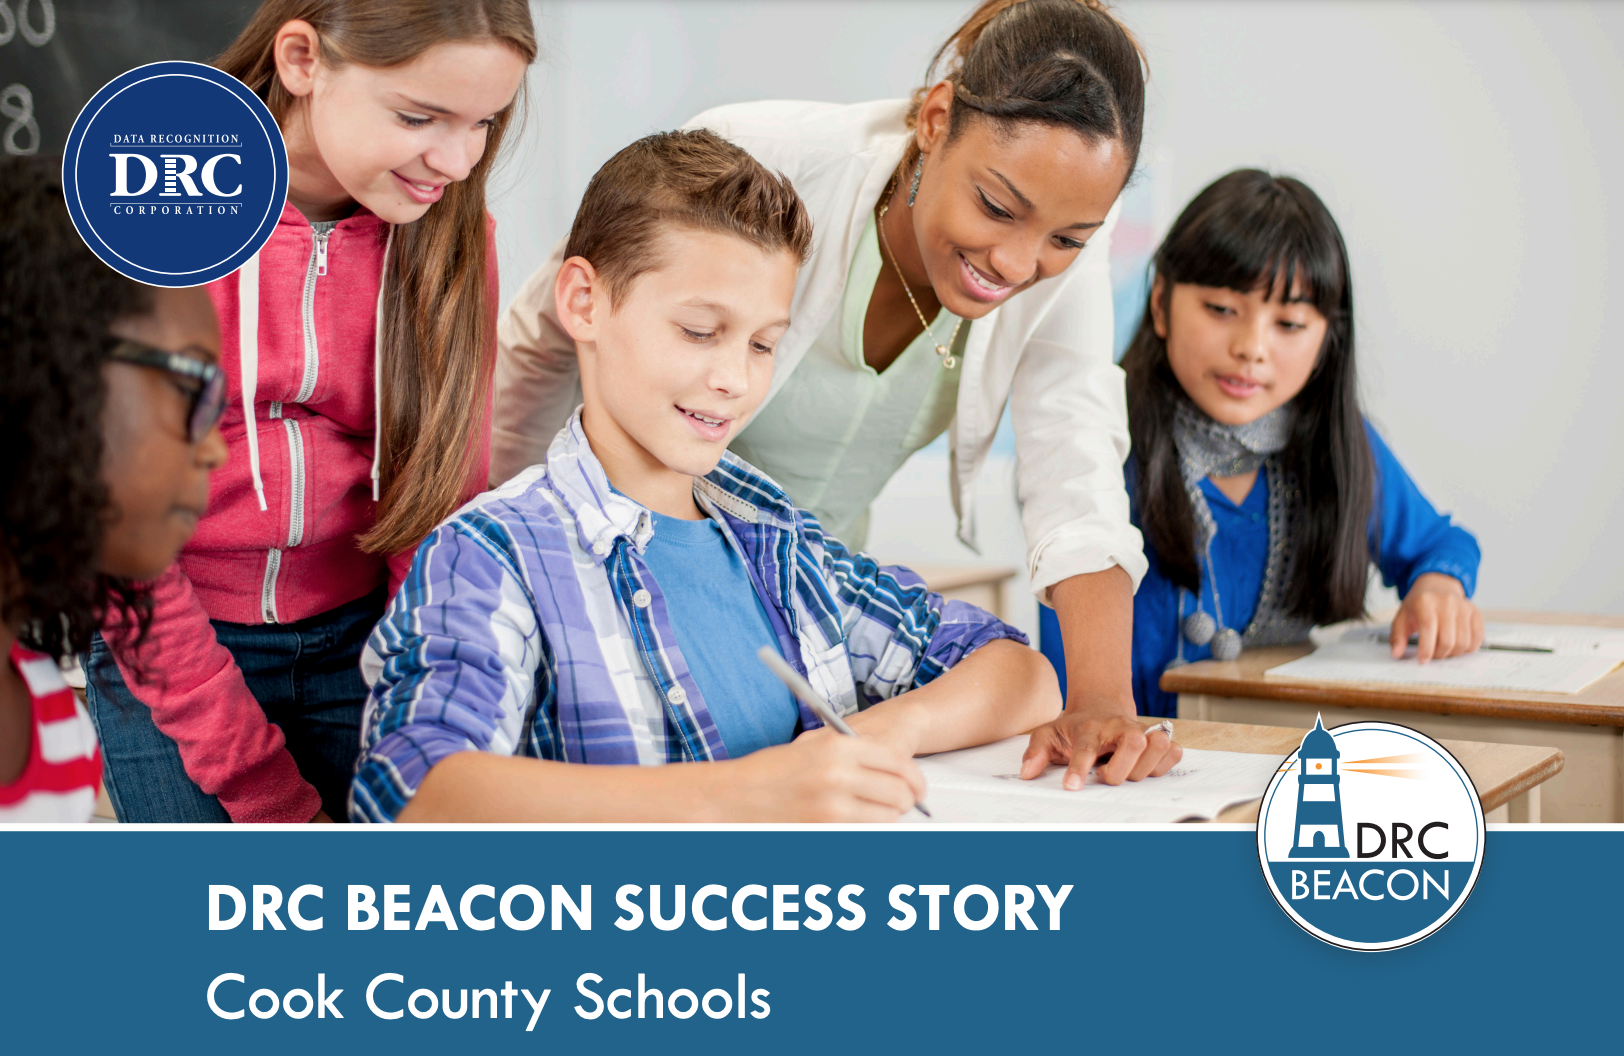 DRC BEACON Success Story: Cook County